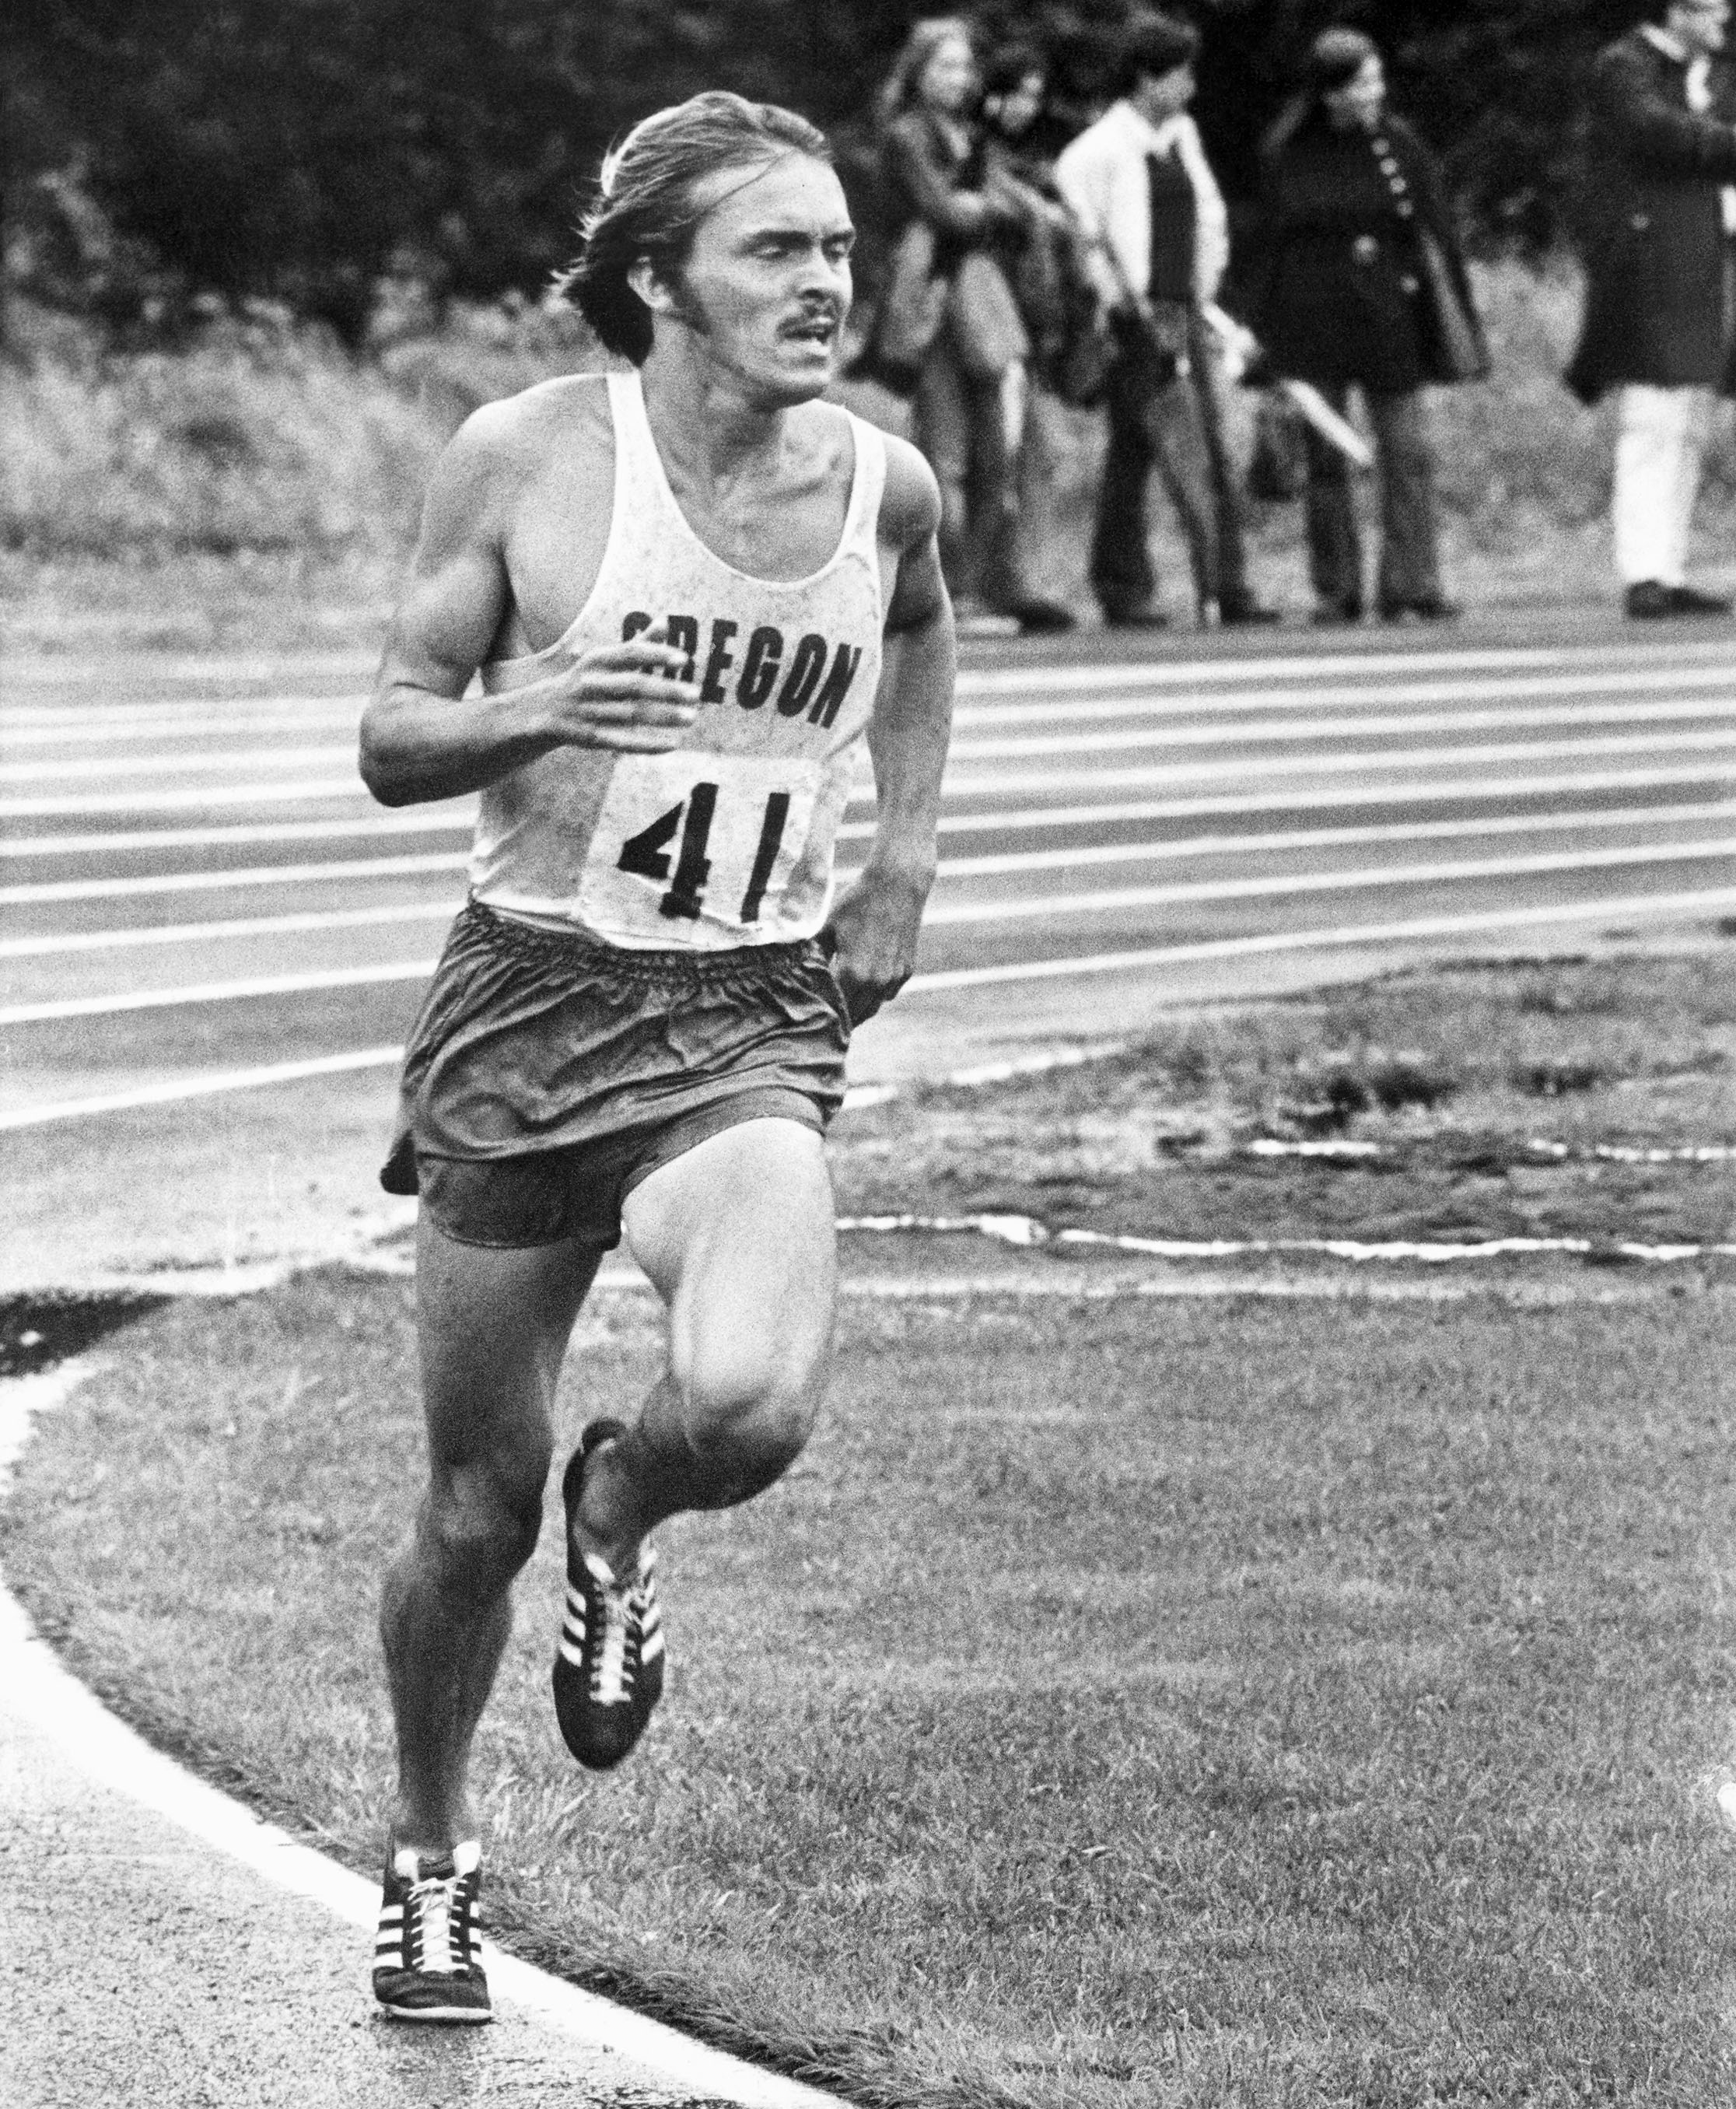 Steve Prefontaine of Oregon set a U.S. record in the 3,000-meter race on Saturday, June 26, 1972 in the Rose Festival Track Meet at Gresham, Oregon. His time was 7 minutes, 45.8 seconds. Profontaine will run 5,000 meters in the U.S. Olympic Trials which get underway on Thursday in Eugene. (AP Photo/Clark)